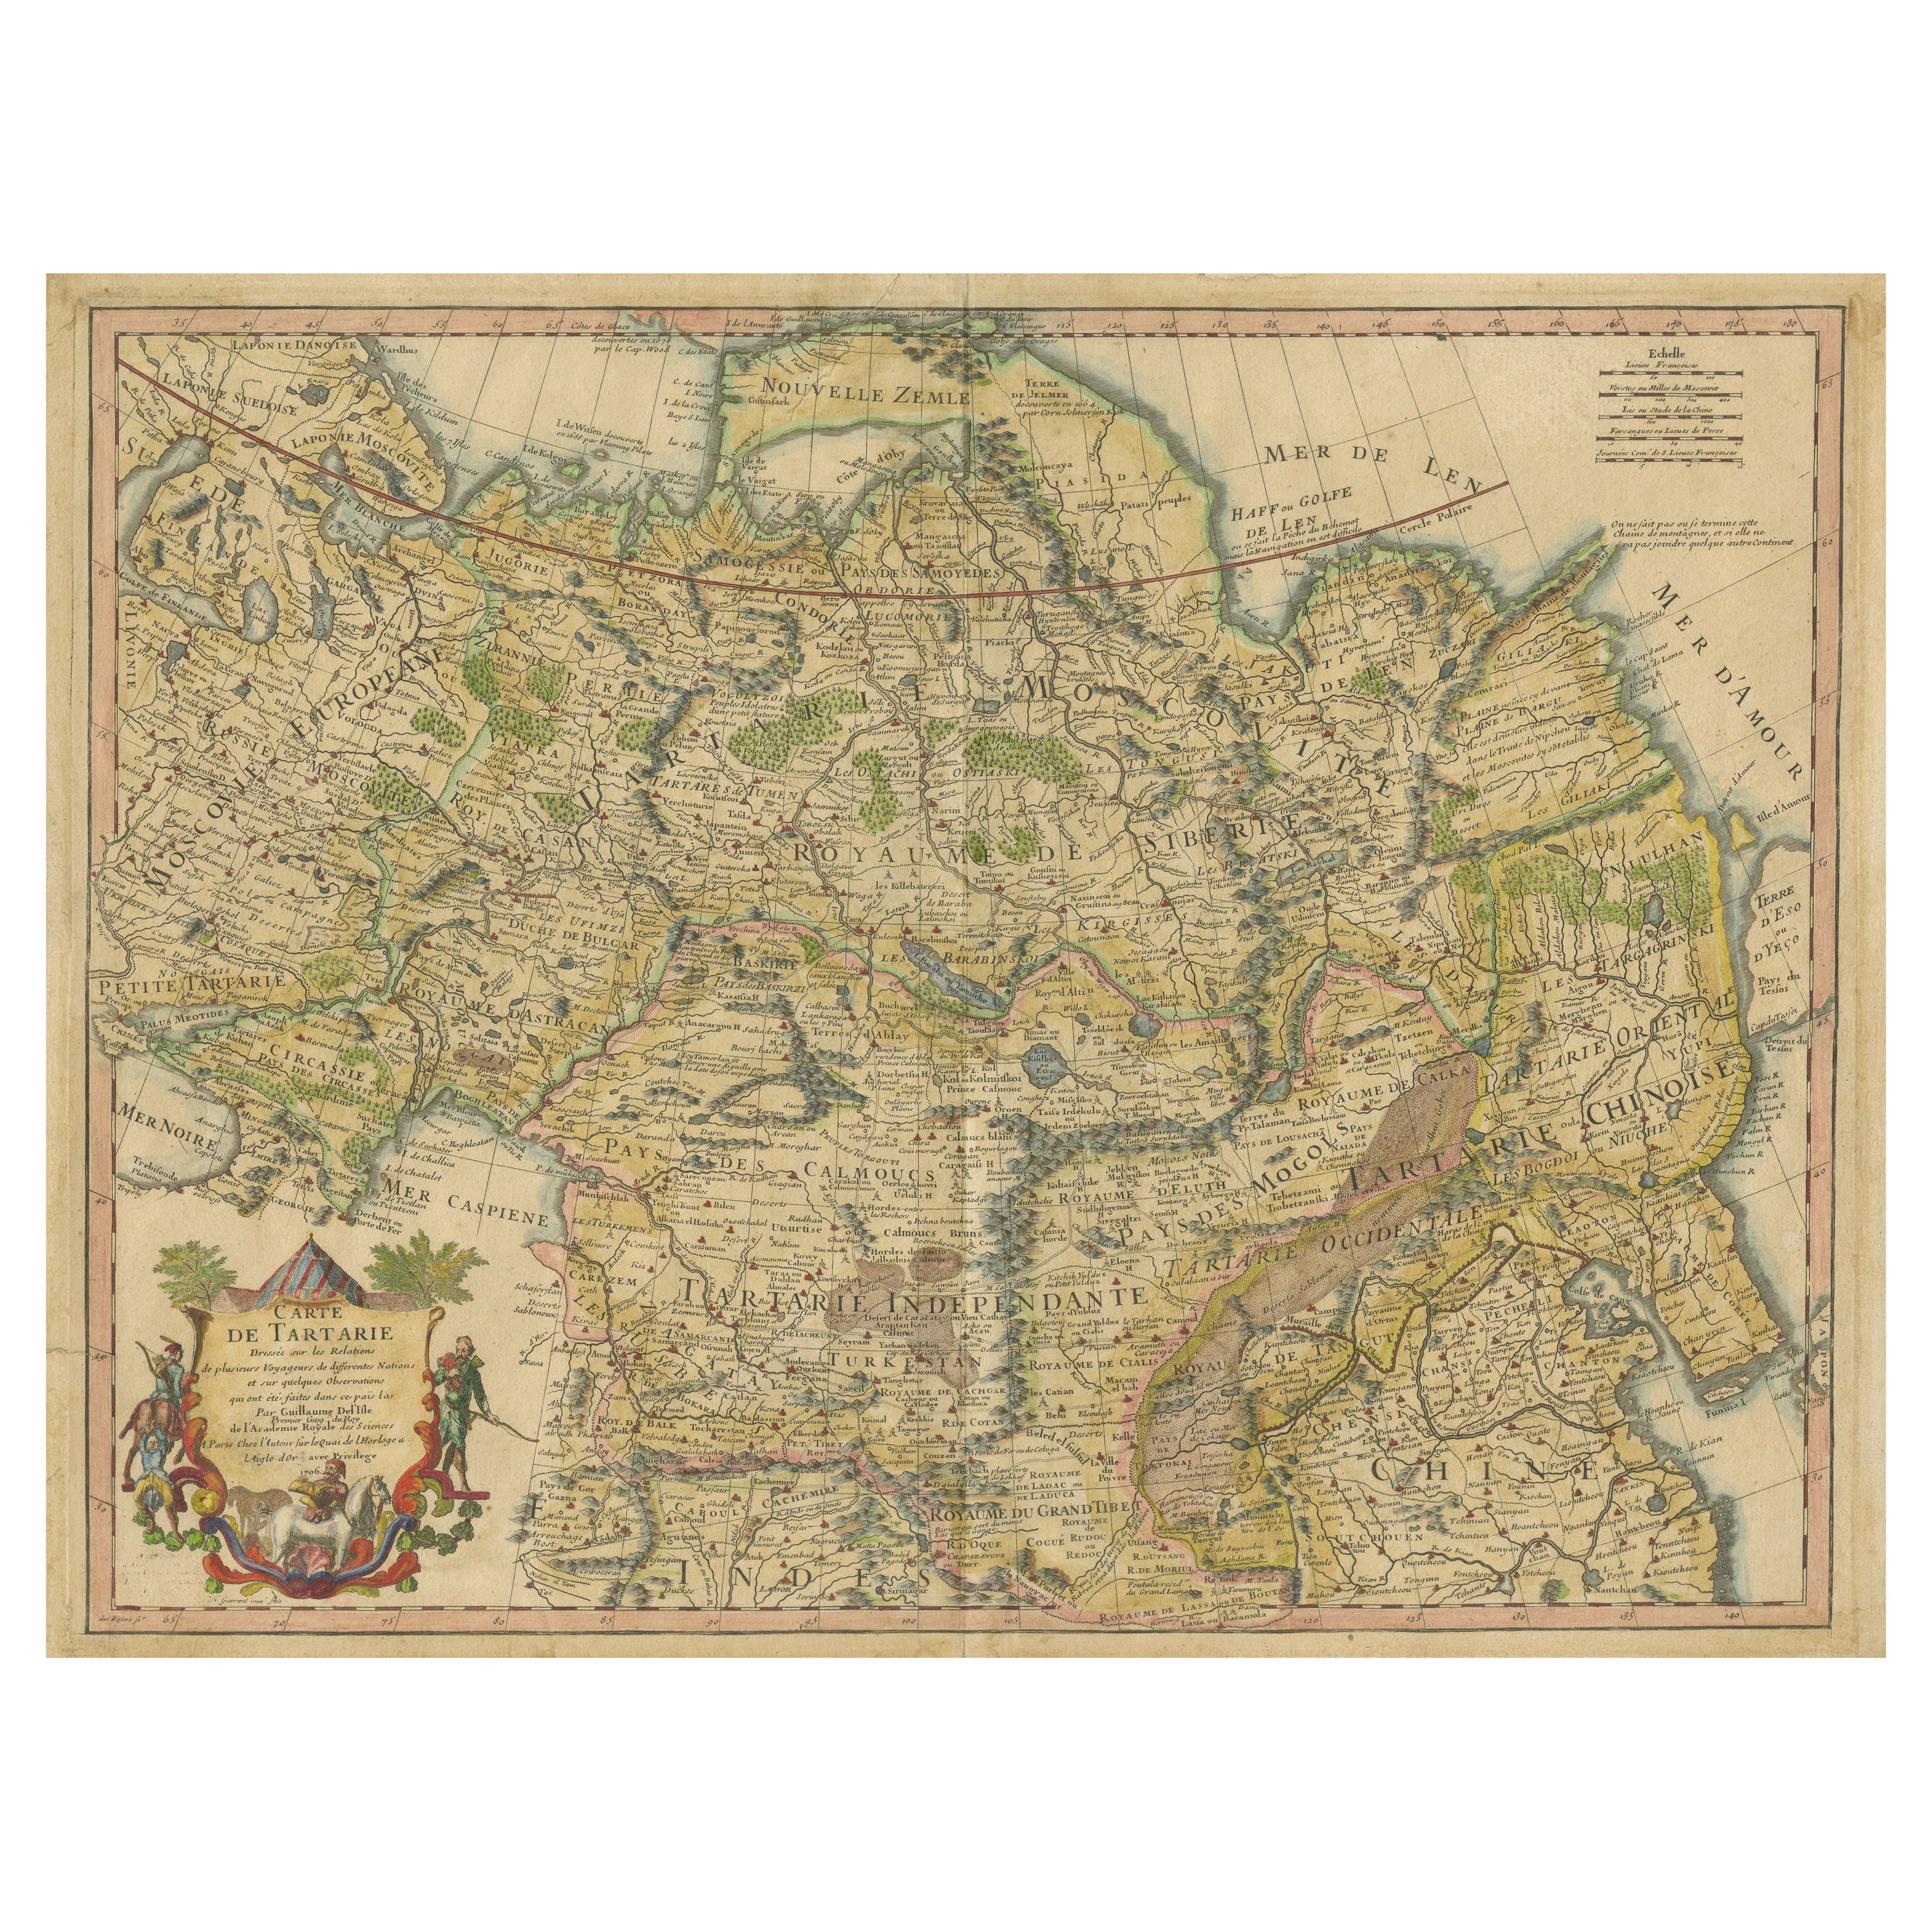 Antique Map of Tartary, Also Showing the Great Wall of China For Sale